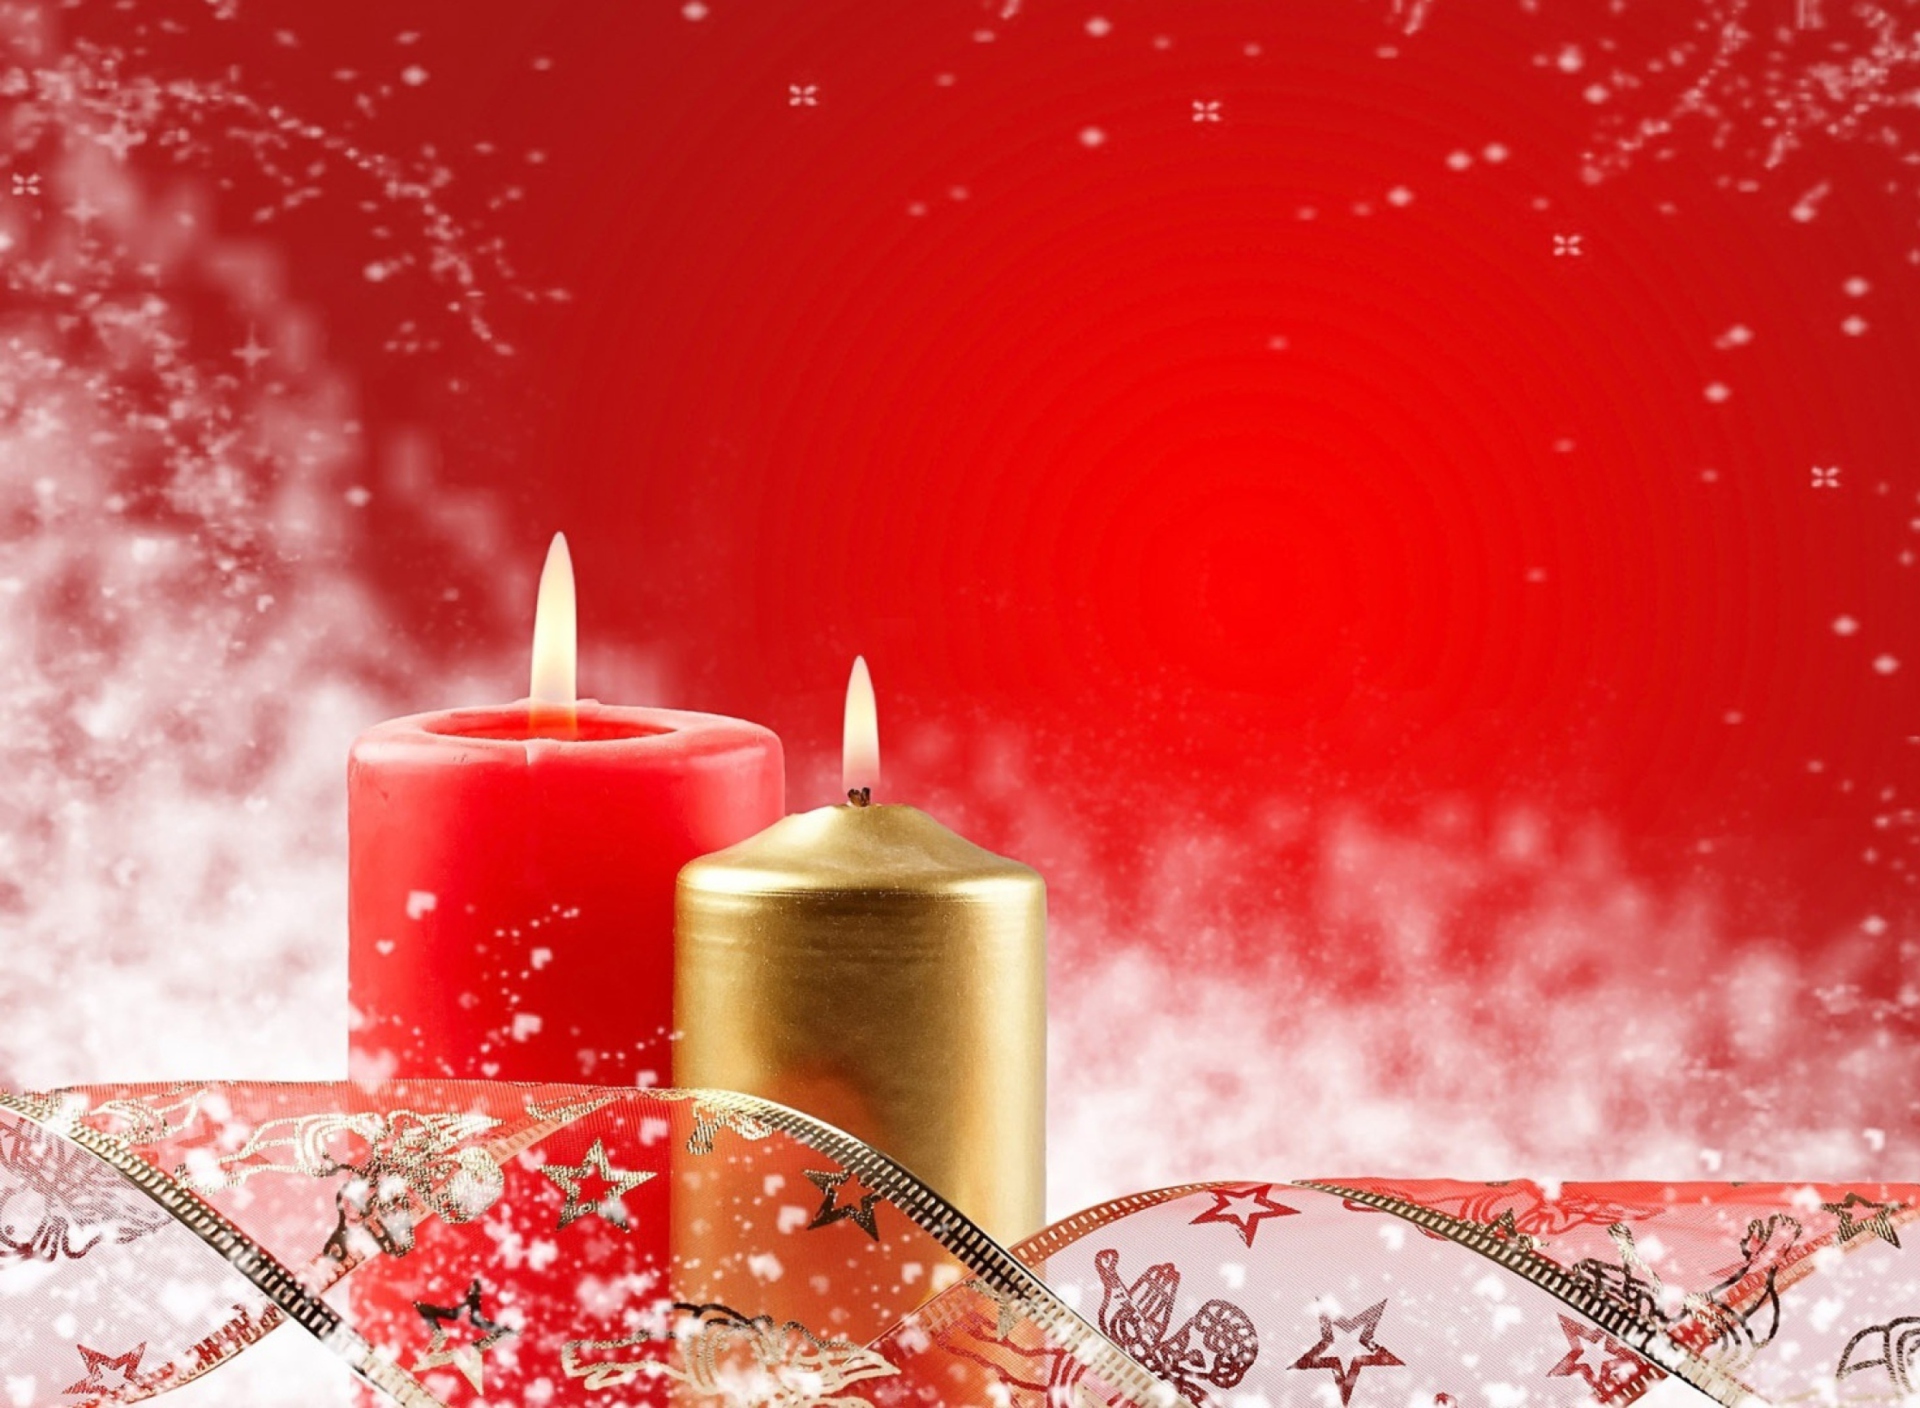 Two Christmas Candles wallpaper 1920x1408